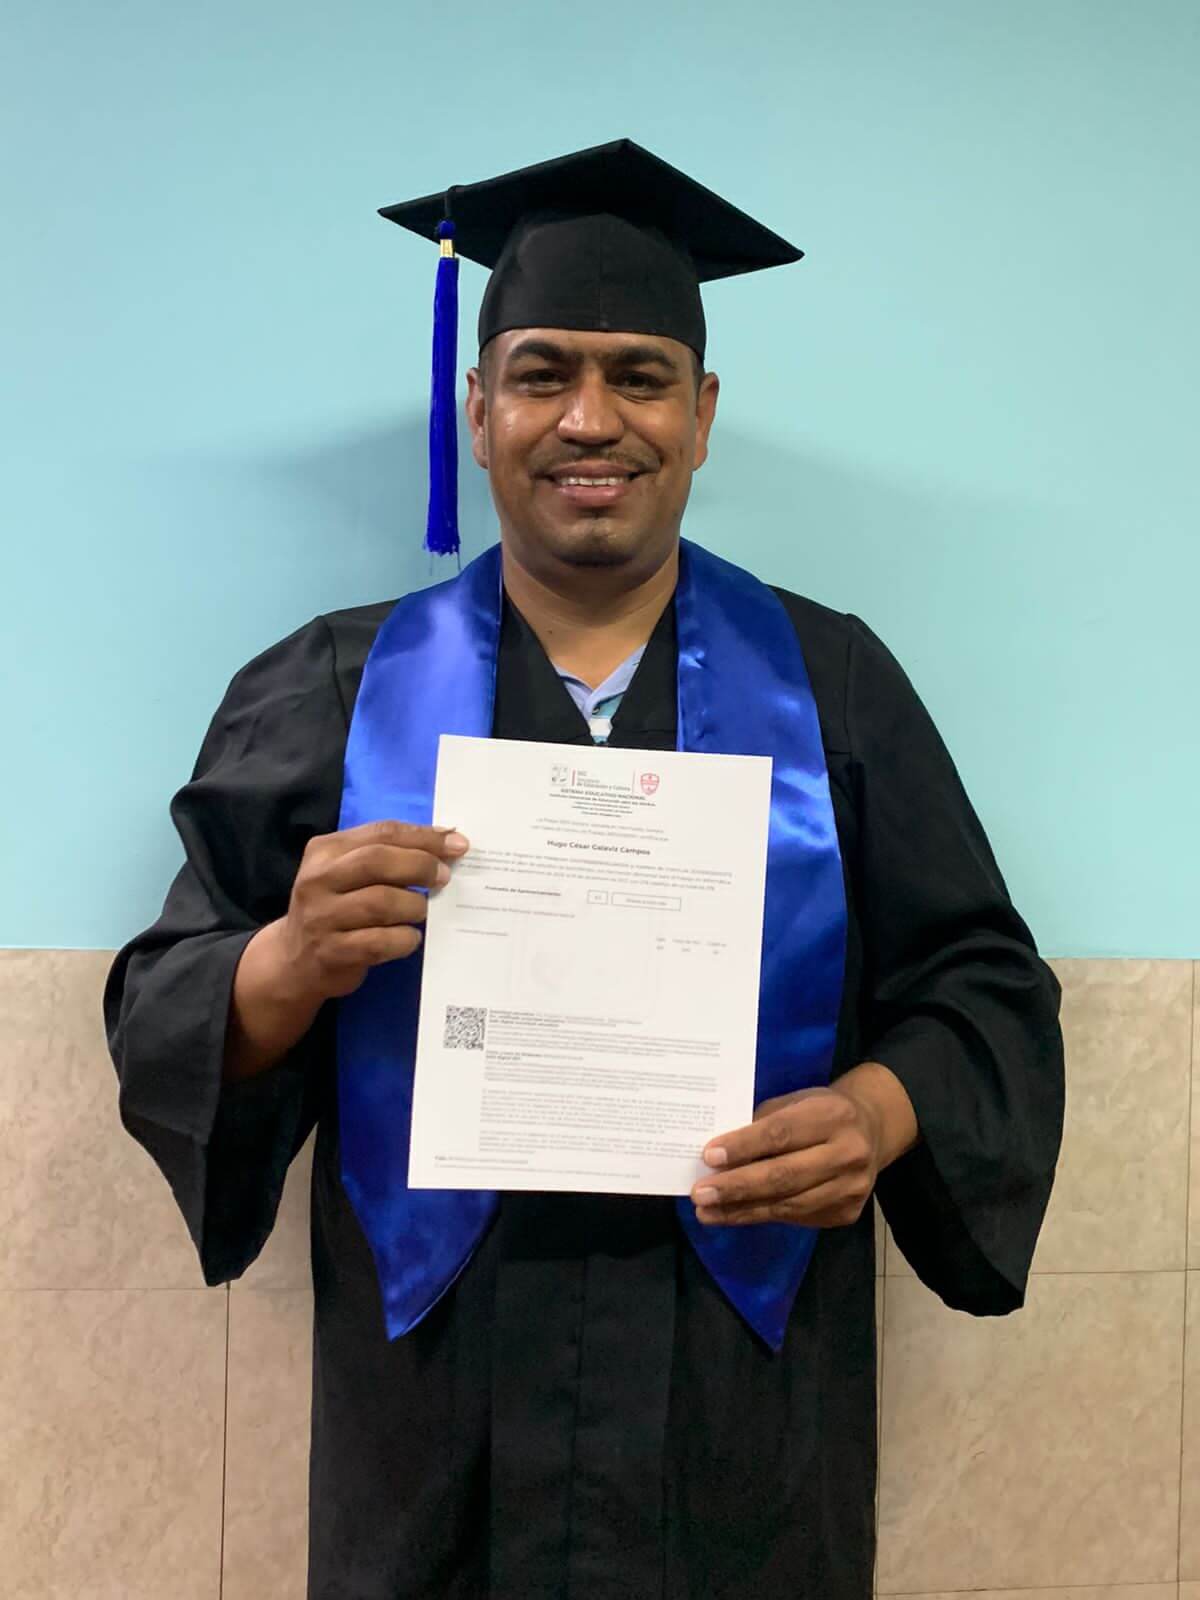 Employee of Winchester Interconnect, a cable and connector manufacturing company, graduating